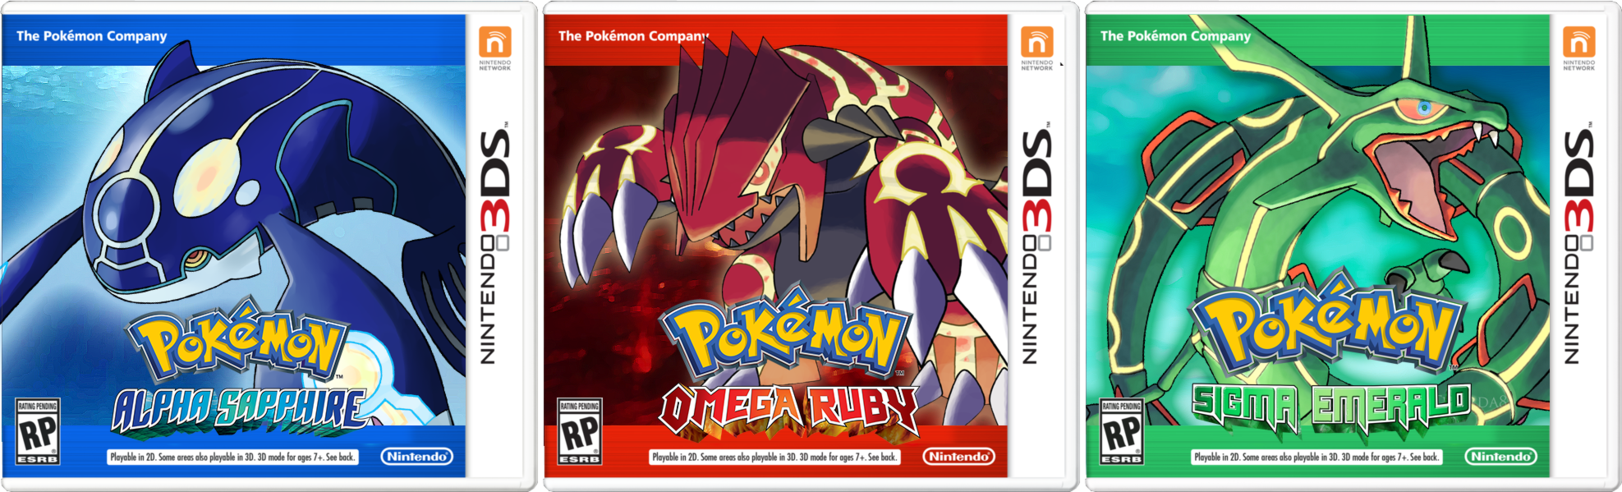 differences between pokemon omega ruby and alpha sapphire